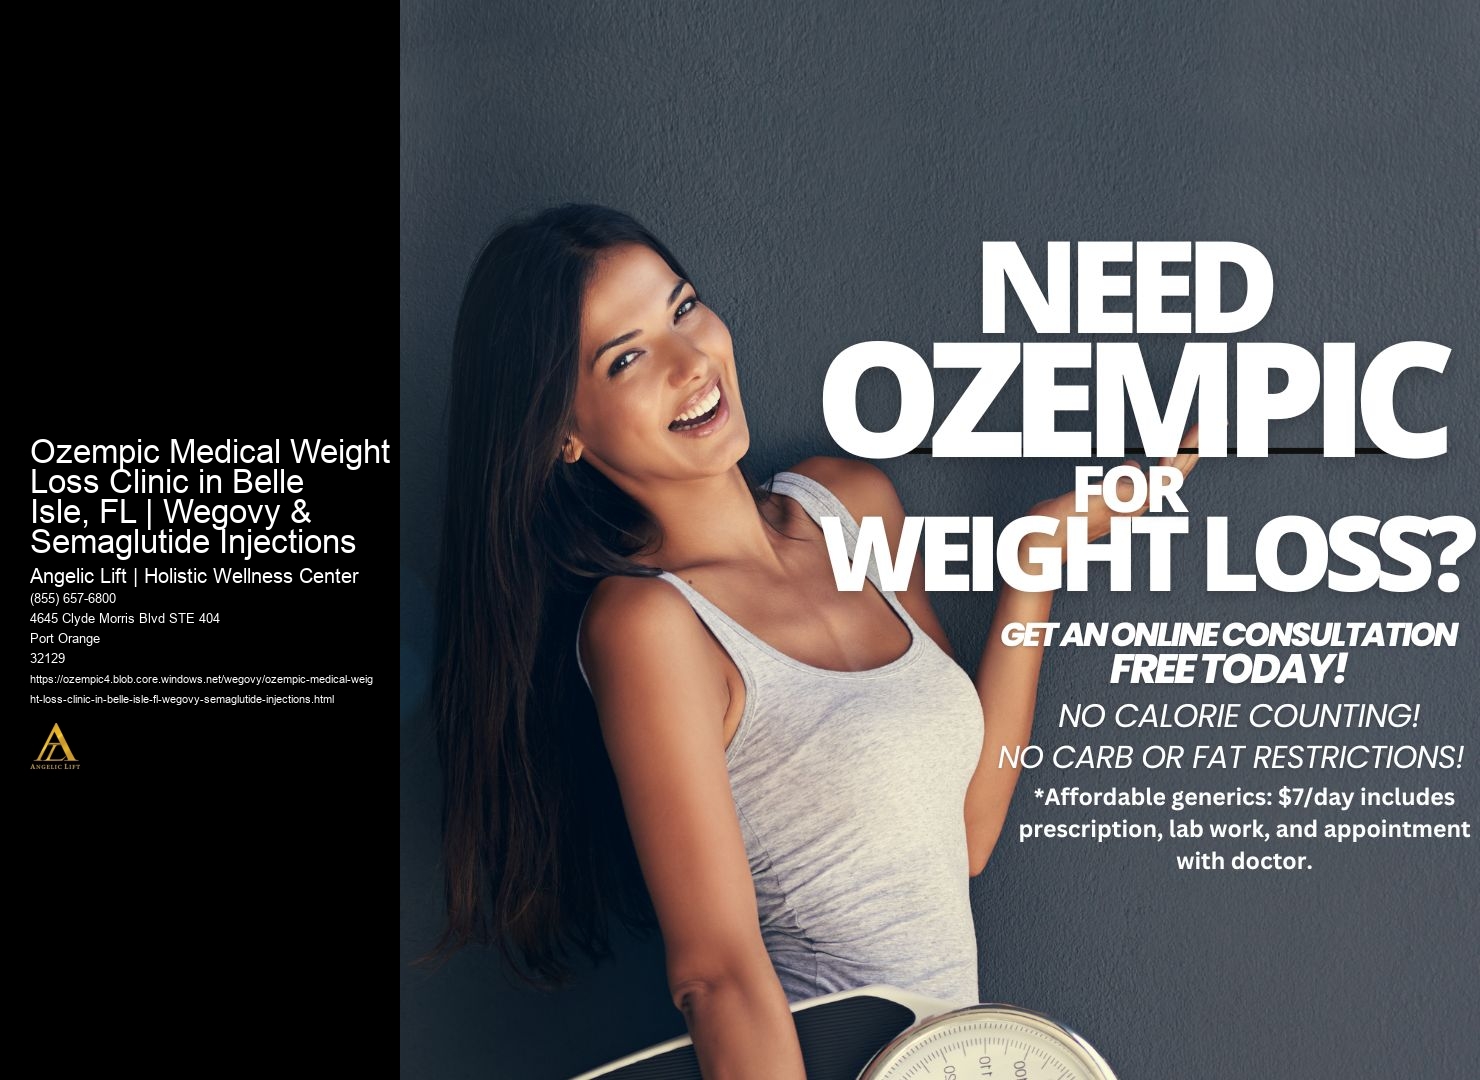 Ozempic Medical Weight Loss Clinic in Belle Isle, FL | Wegovy & Semaglutide Injections